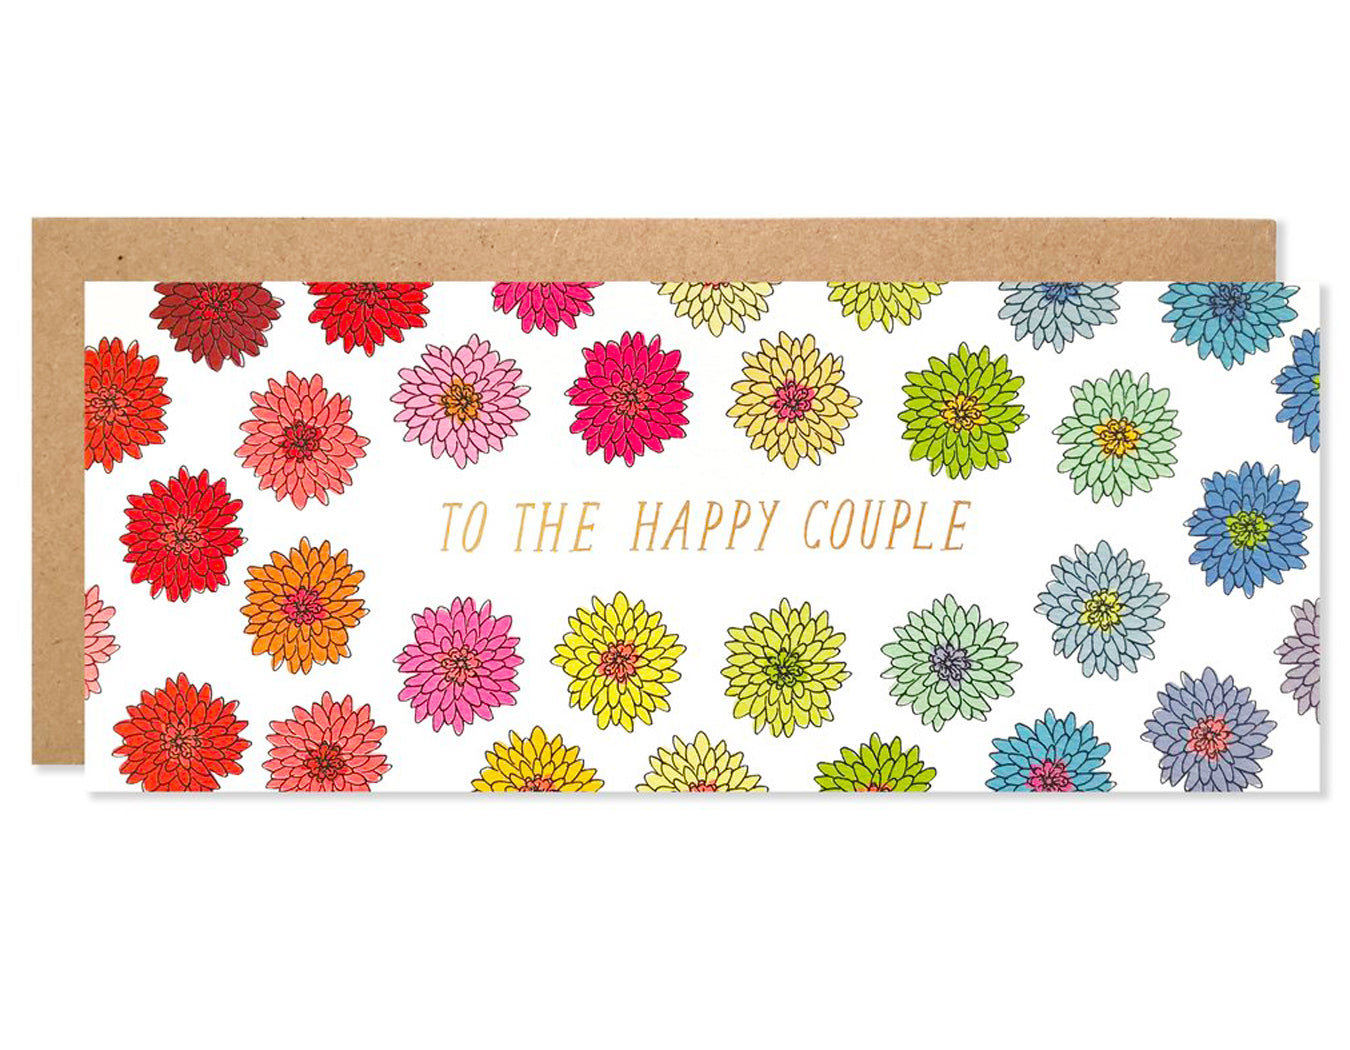 multiple colors of the same flower surround text that reads to the happy couple in gold foil